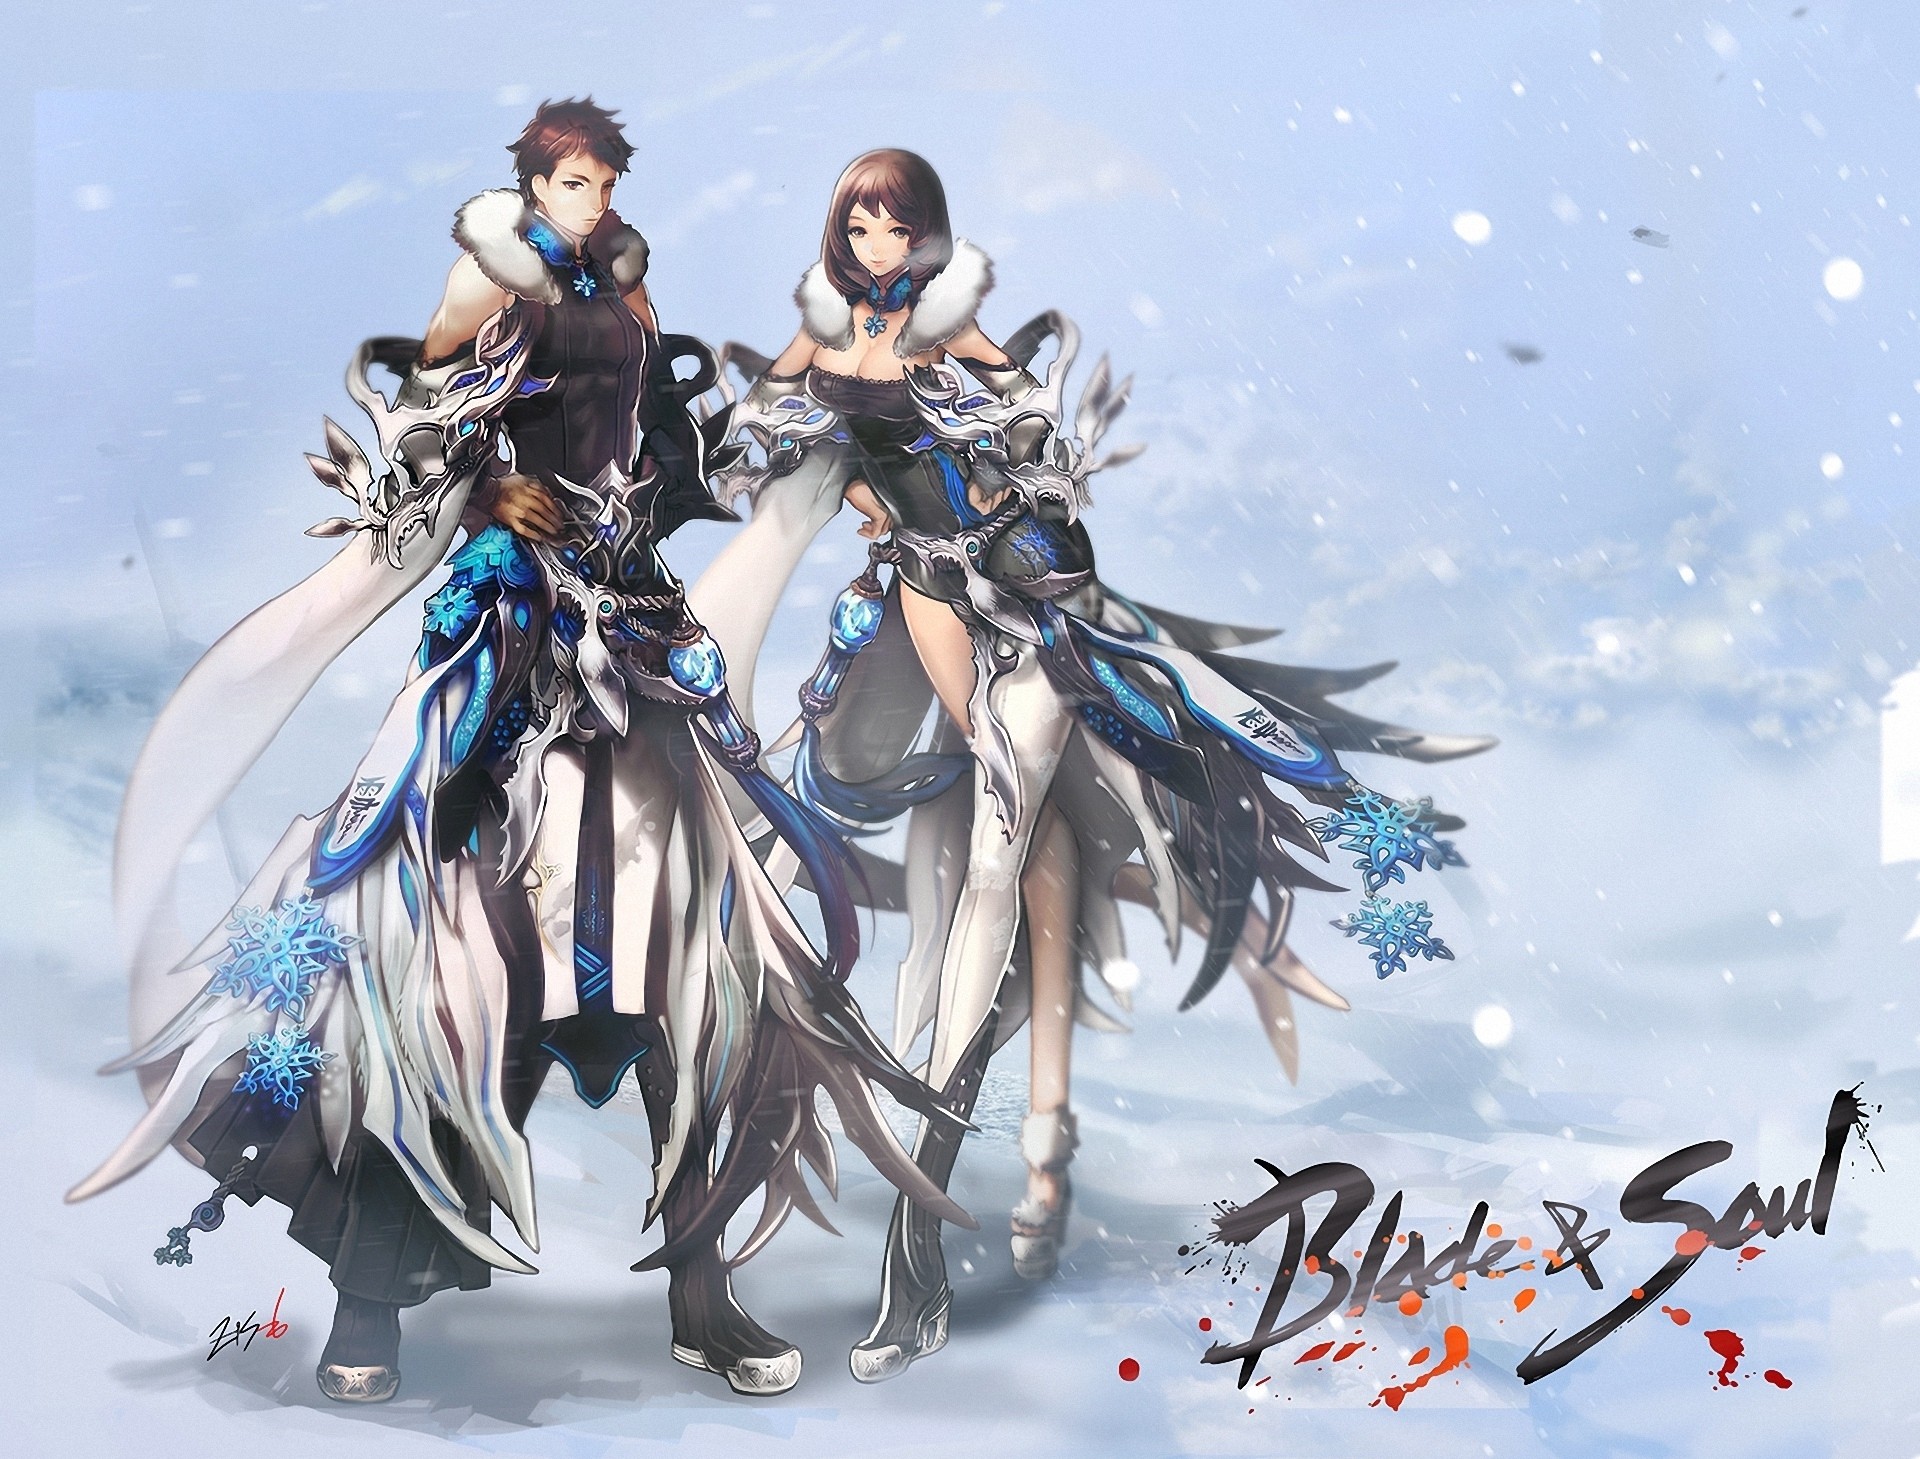  Blade And Soul Wallpaper 150648